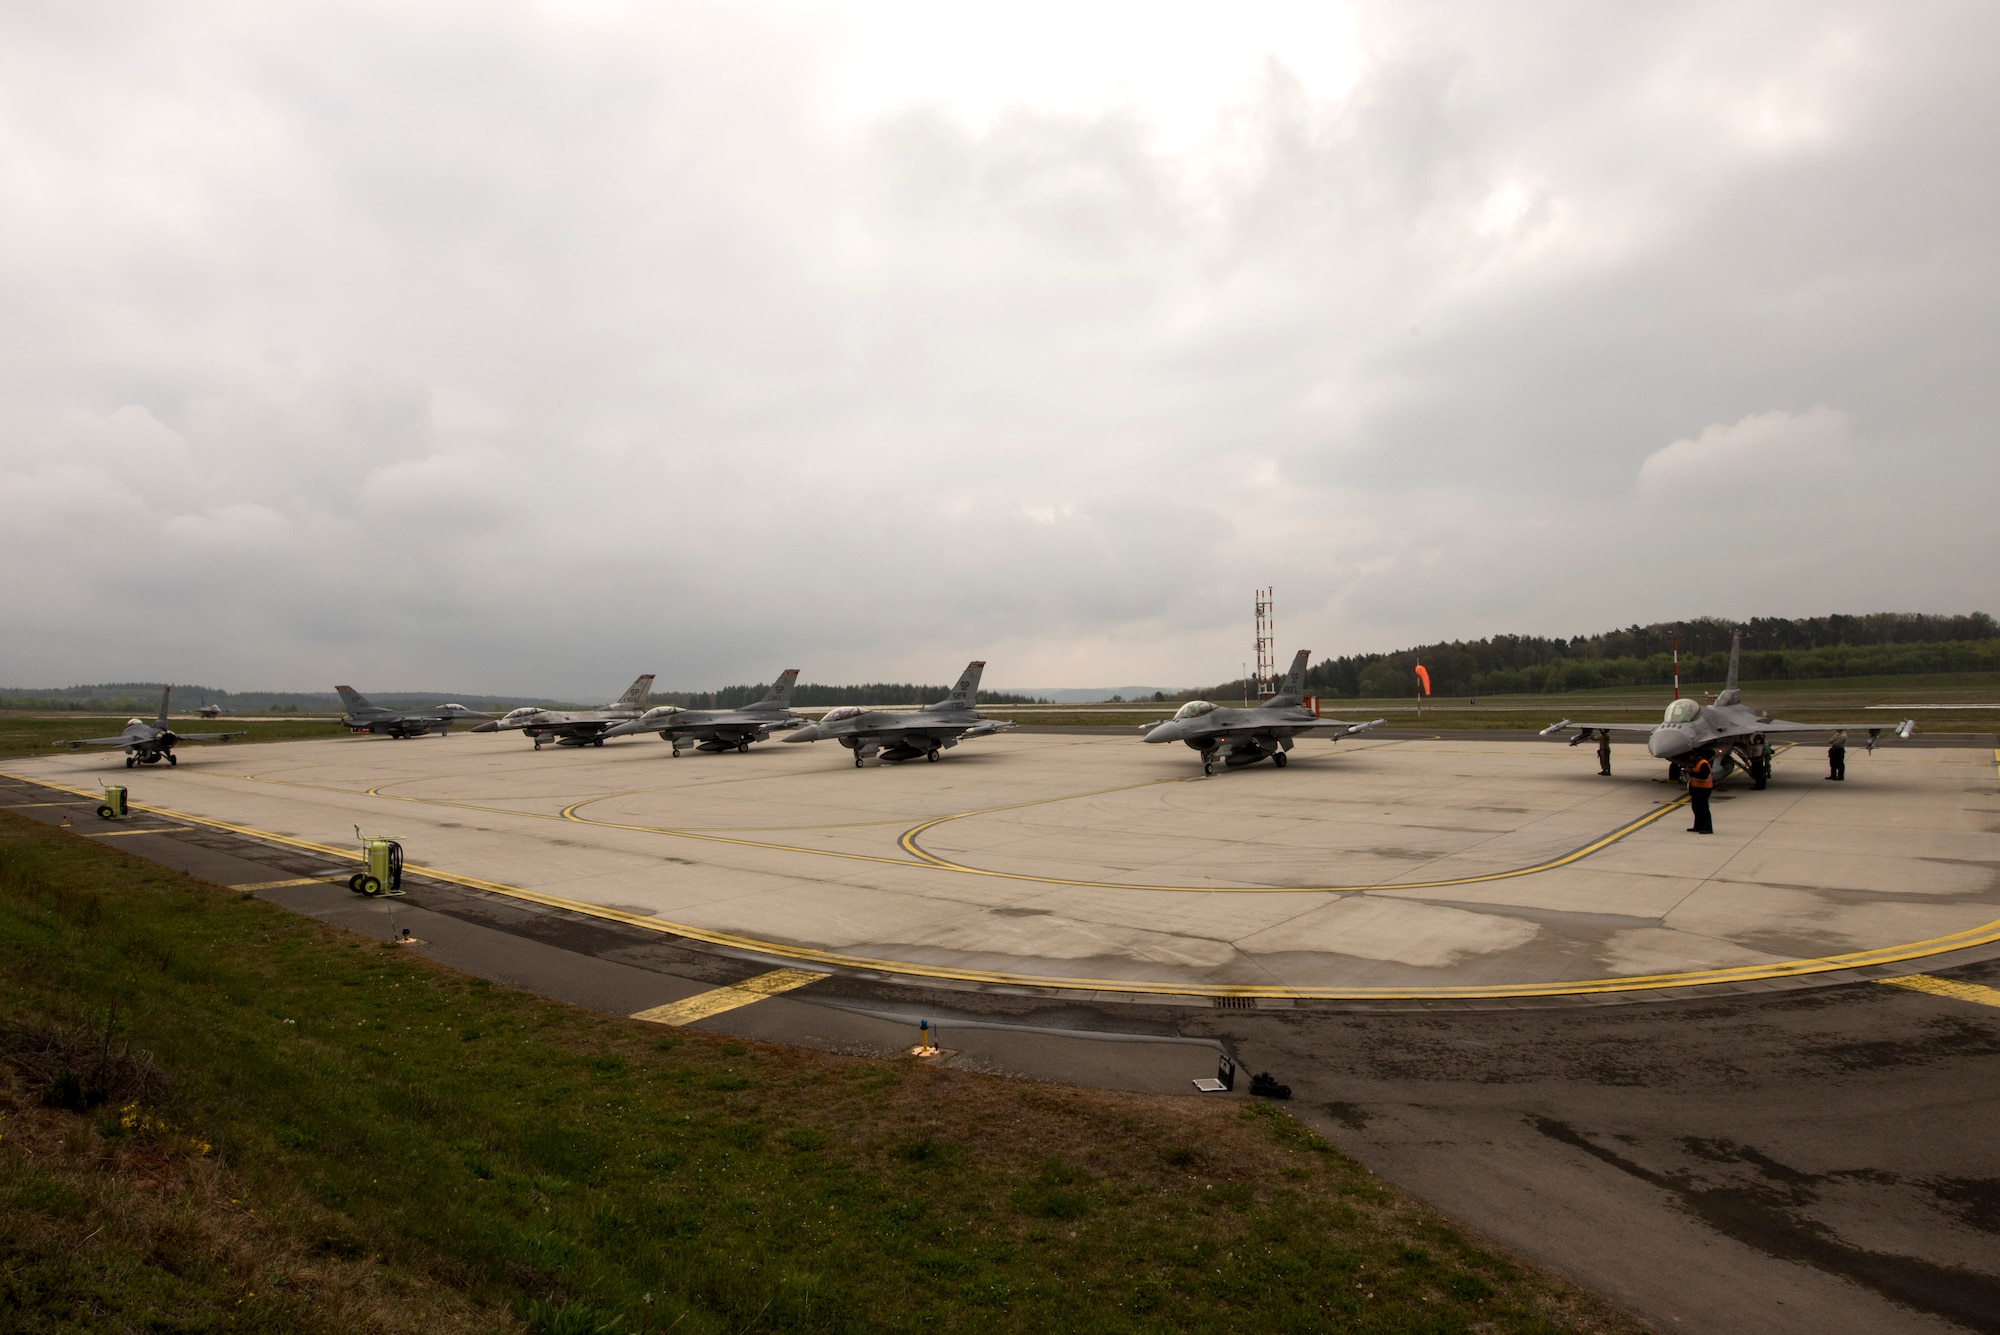 U.S. Air Force F-16 Fighting Falcons assigned to the 480th Fighter Squadron wait for inspections during a "14 front" launch at Spangdahlem Air Base, Germany, May 4th, 2017. From April 24 to May 5, the 480th FS and 52nd Aircraft Maintenance Squadron supported 26 sorties a day, 14 in the morning and 12 in the afternoon. This flying tempo is referred to as a, “14 turn 12,” and is a 16 percent increase over normal operations. During normal operations, it’s standard to launch a 12 turn 10, or 4 fewer sorties per day. Preparing and launching 14 aircraft in one go is referred to as a “14 front.” (U.S. Air Force photo by Preston Cherry)